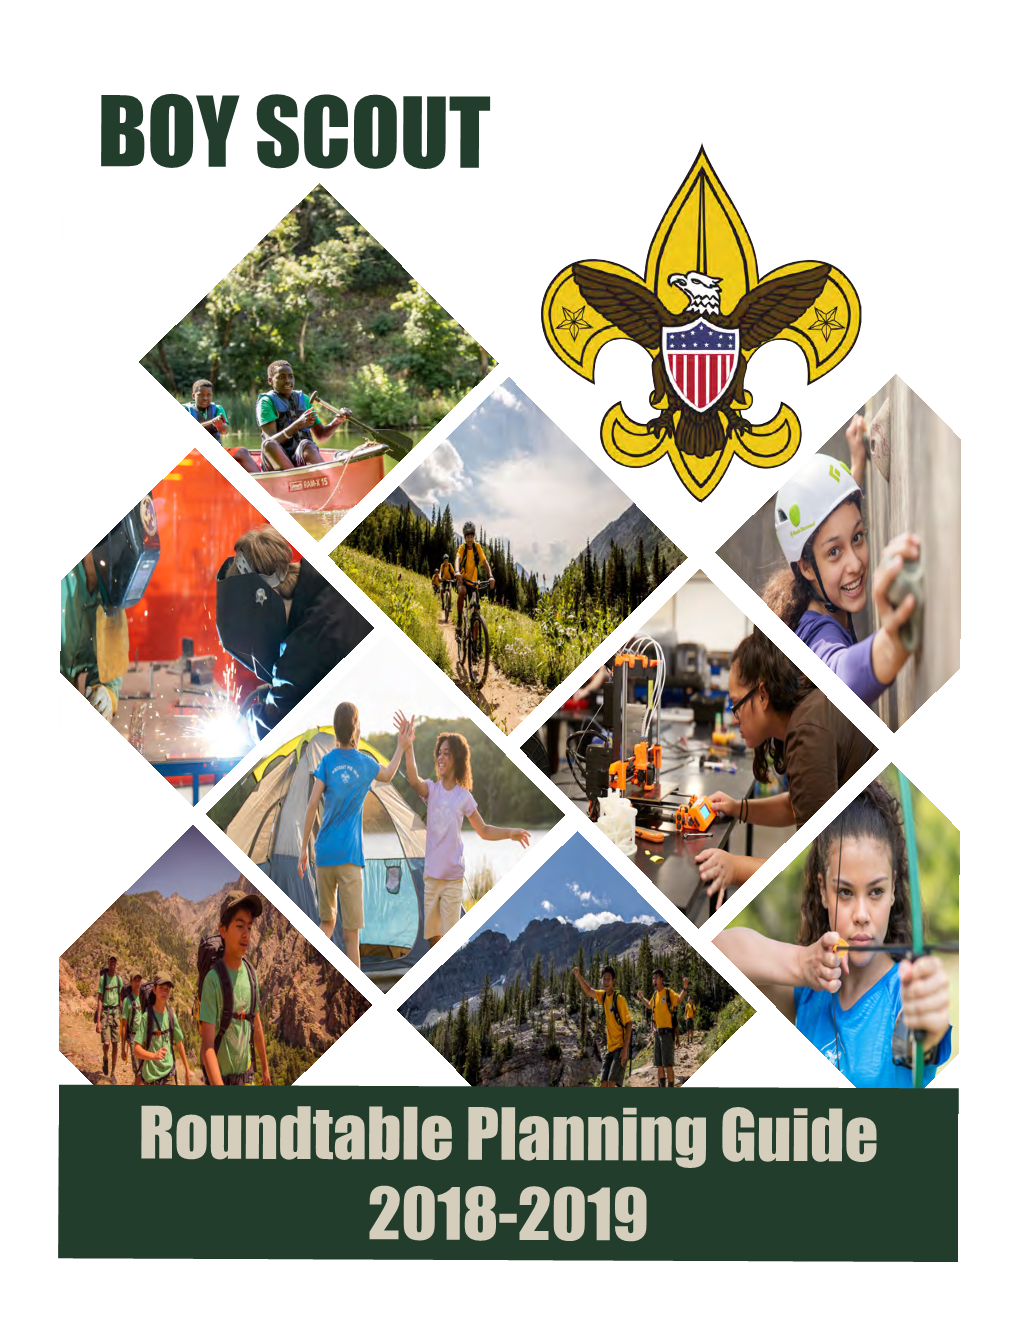 Boy Scouts Roundtable Planning Guide